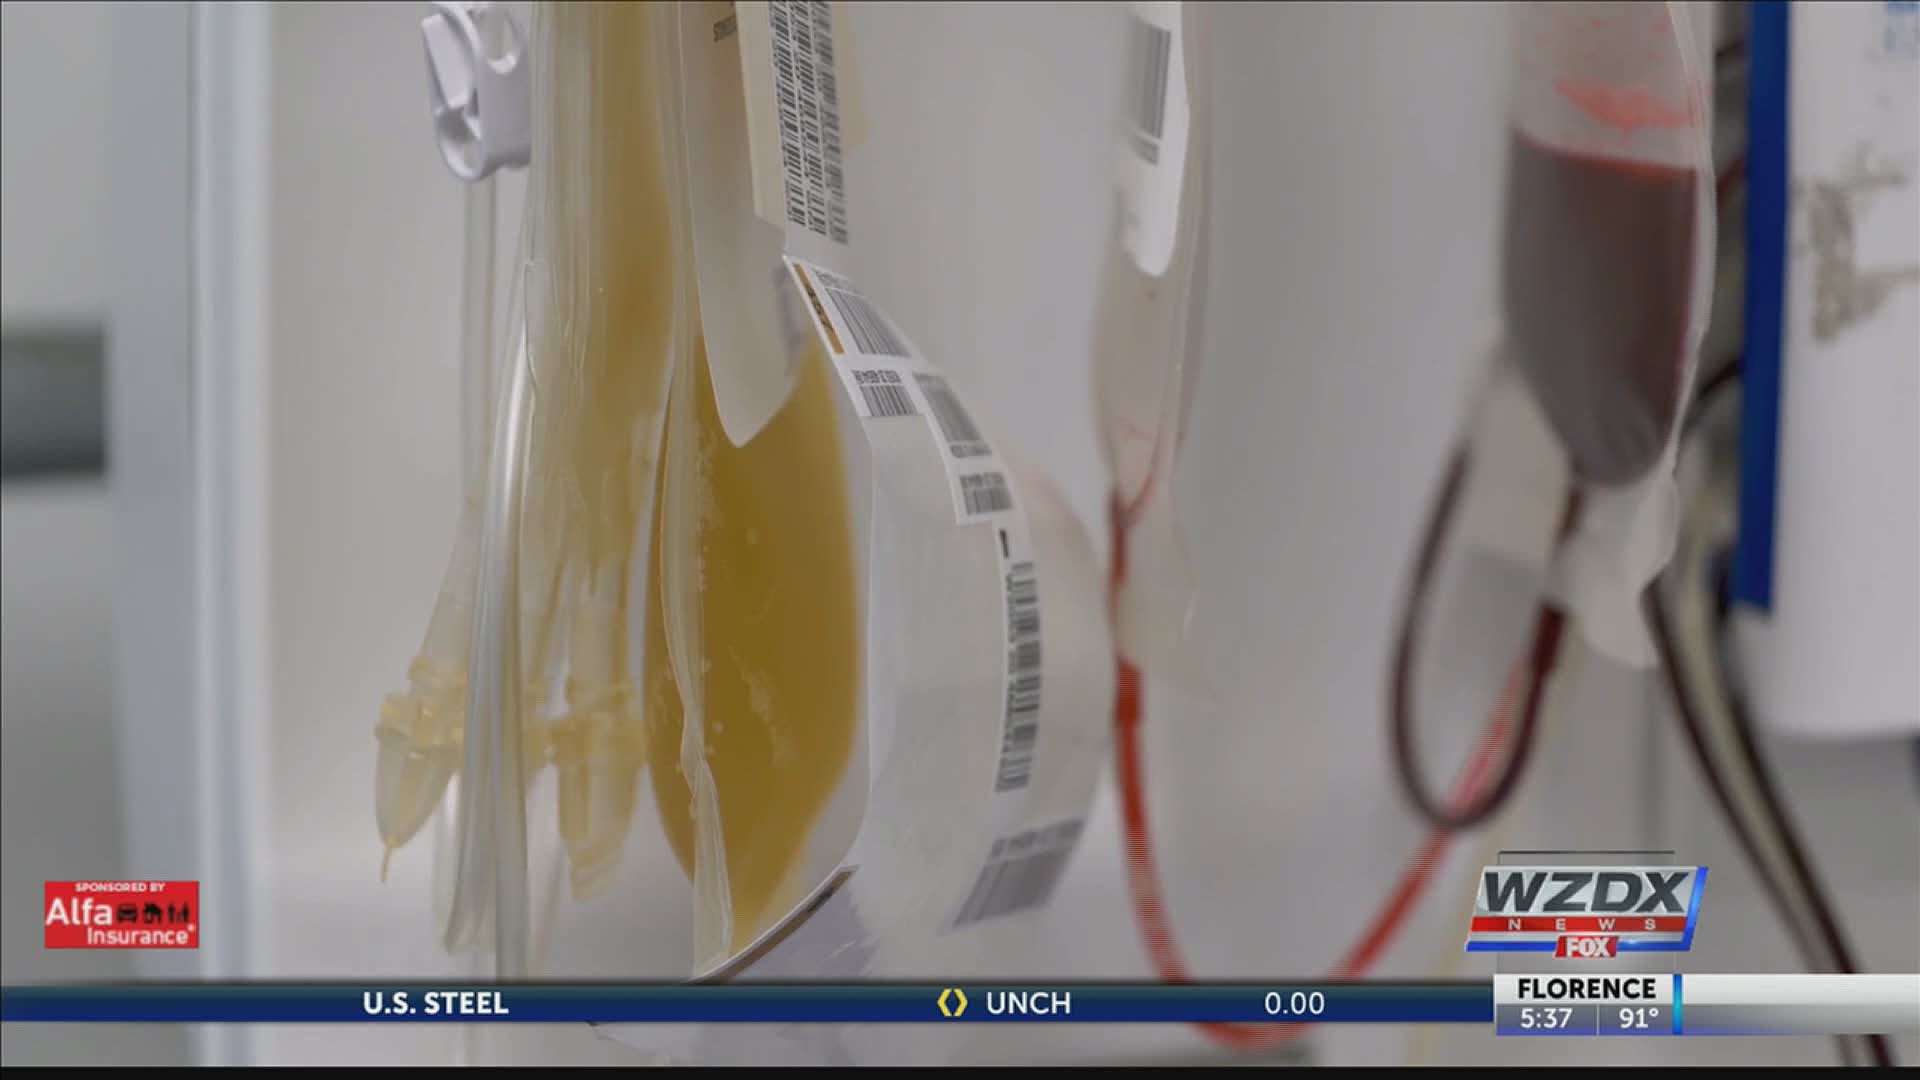 According to the American Red Cross, a spike in COVID-19 cases has led to an emergency plasma shortage.